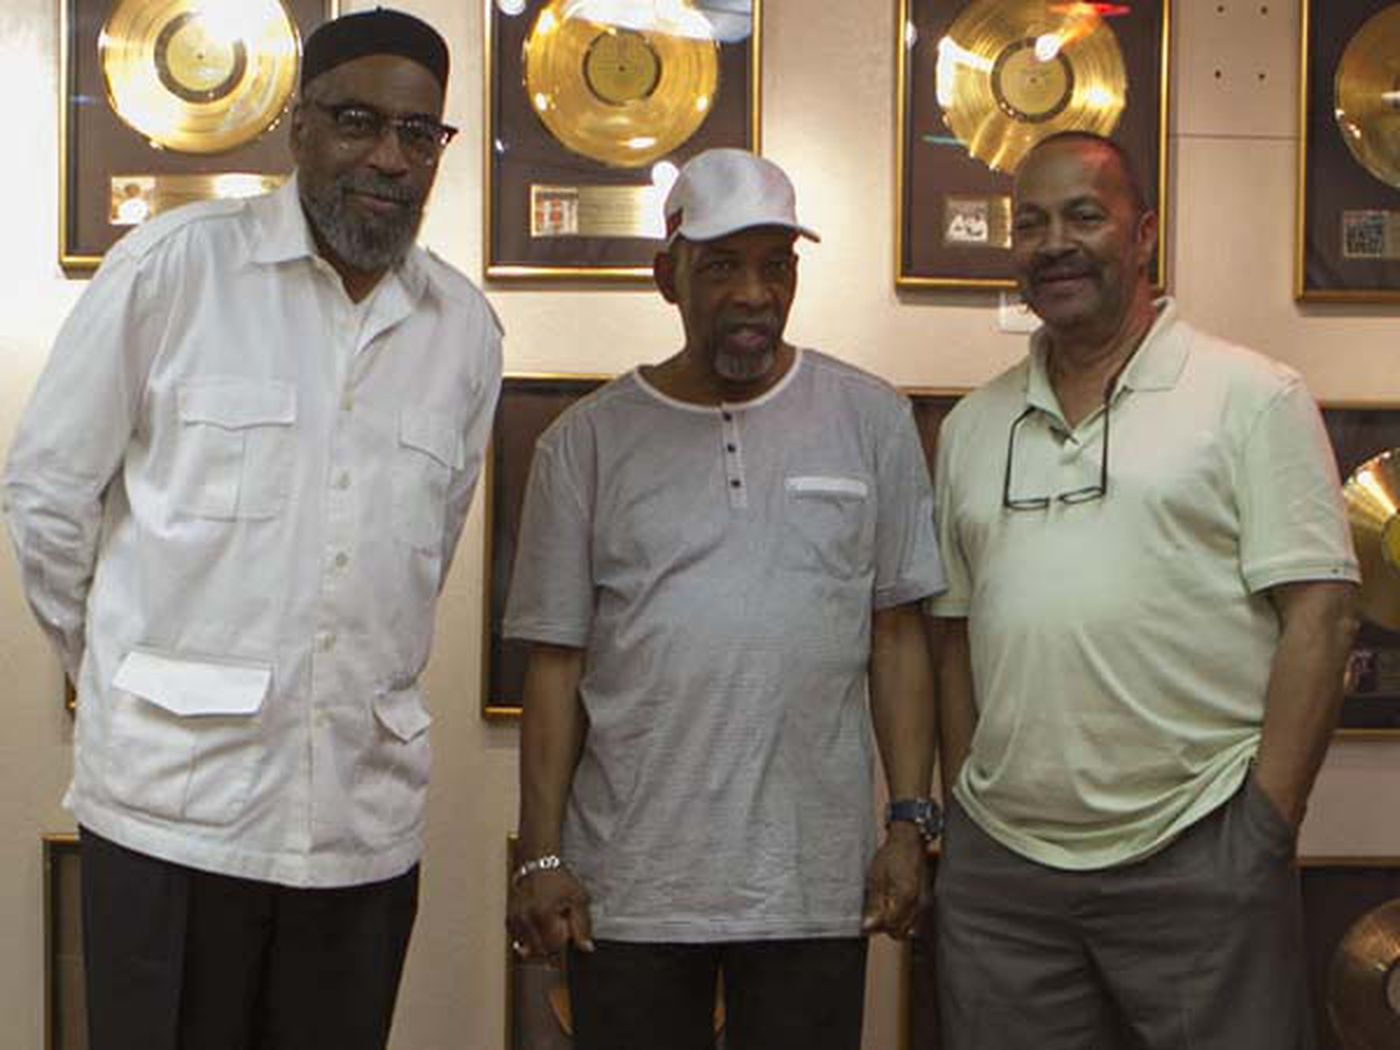 Musicians Kenneth Gamble, Leon Huff and Thom Bell together at Gamble and Huff Music, on Broad Street, in Philadelphia, on Thursday, May 30, 2013. ( Stephanie Aaronson / Staff Photographer )